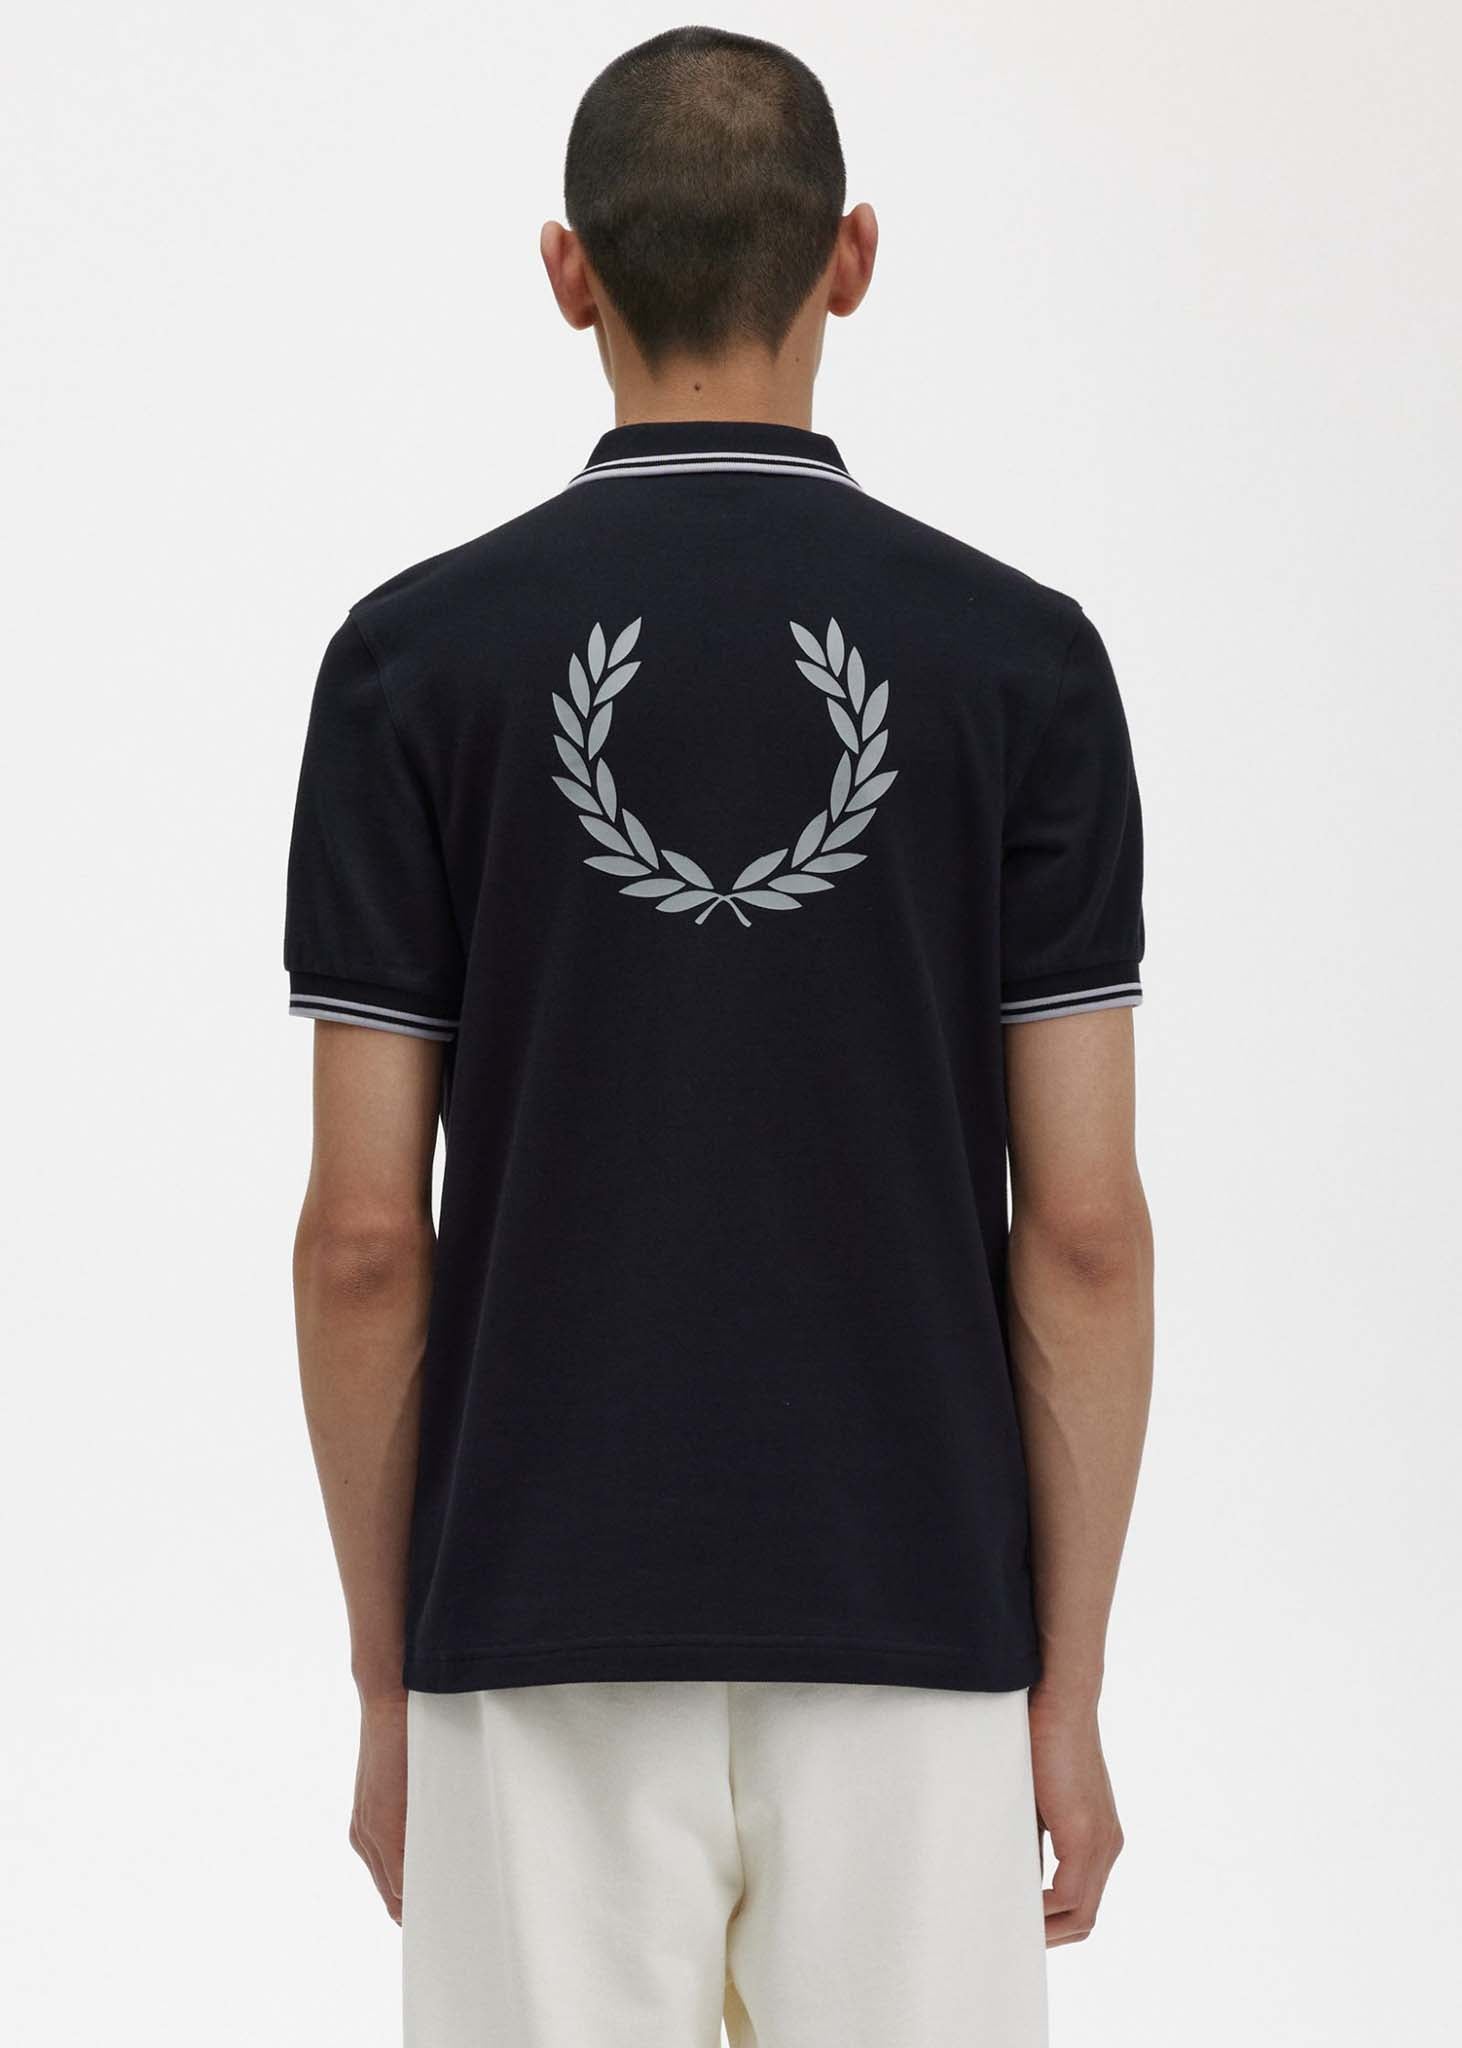 Fred Perry Polo's  Back graphic polo shirt - black 